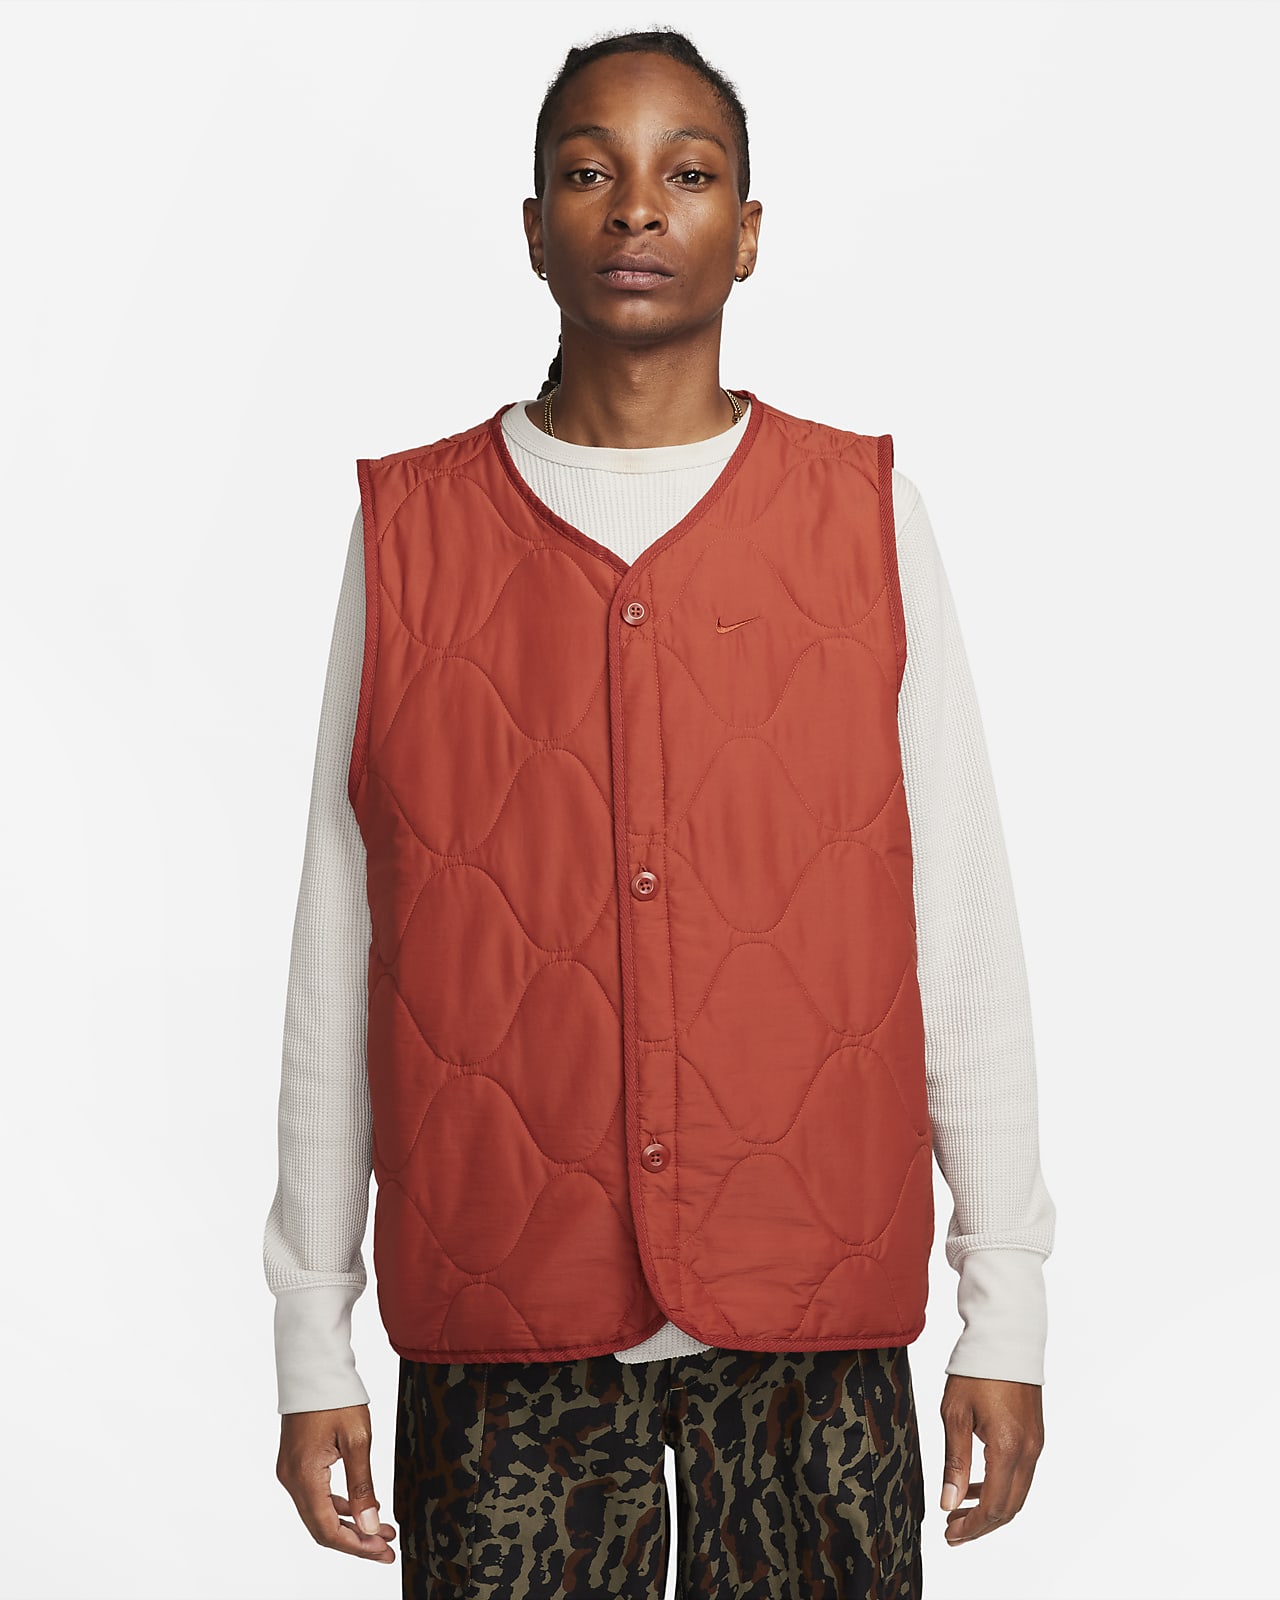 Nike Life Men's Woven Insulated Military Gilet